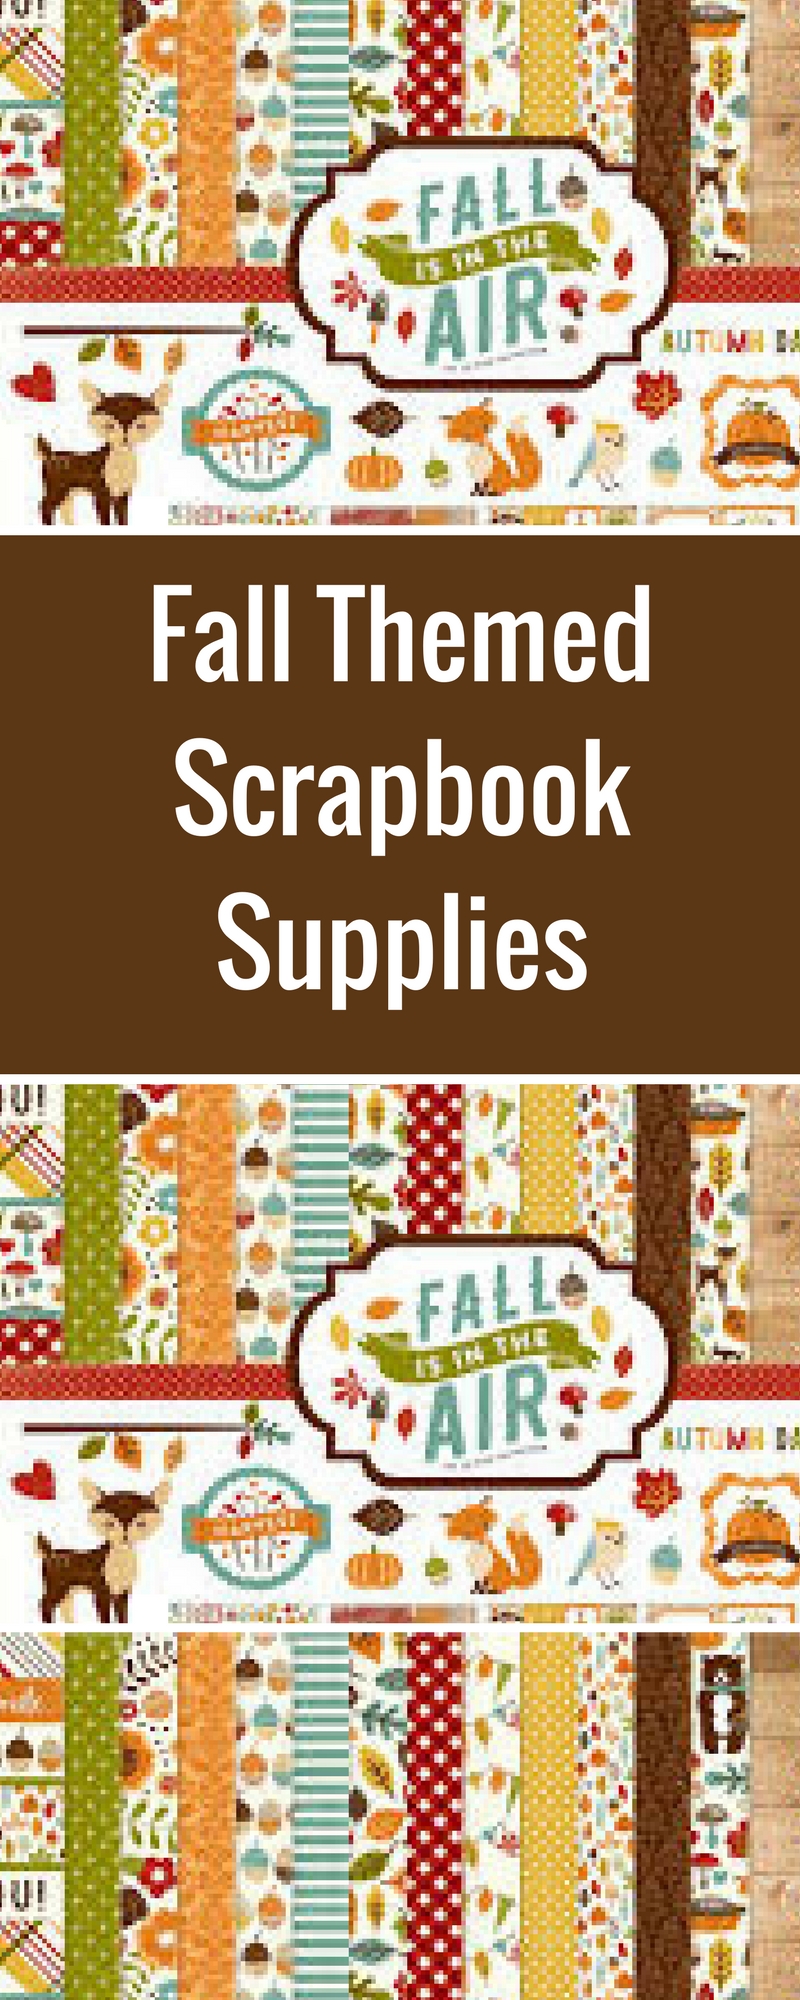 Echo Park Paper Co. Hello Fall Scrapbook Collection | Designed by Katelyn Grosart | Creative Scrapbooker Magazine